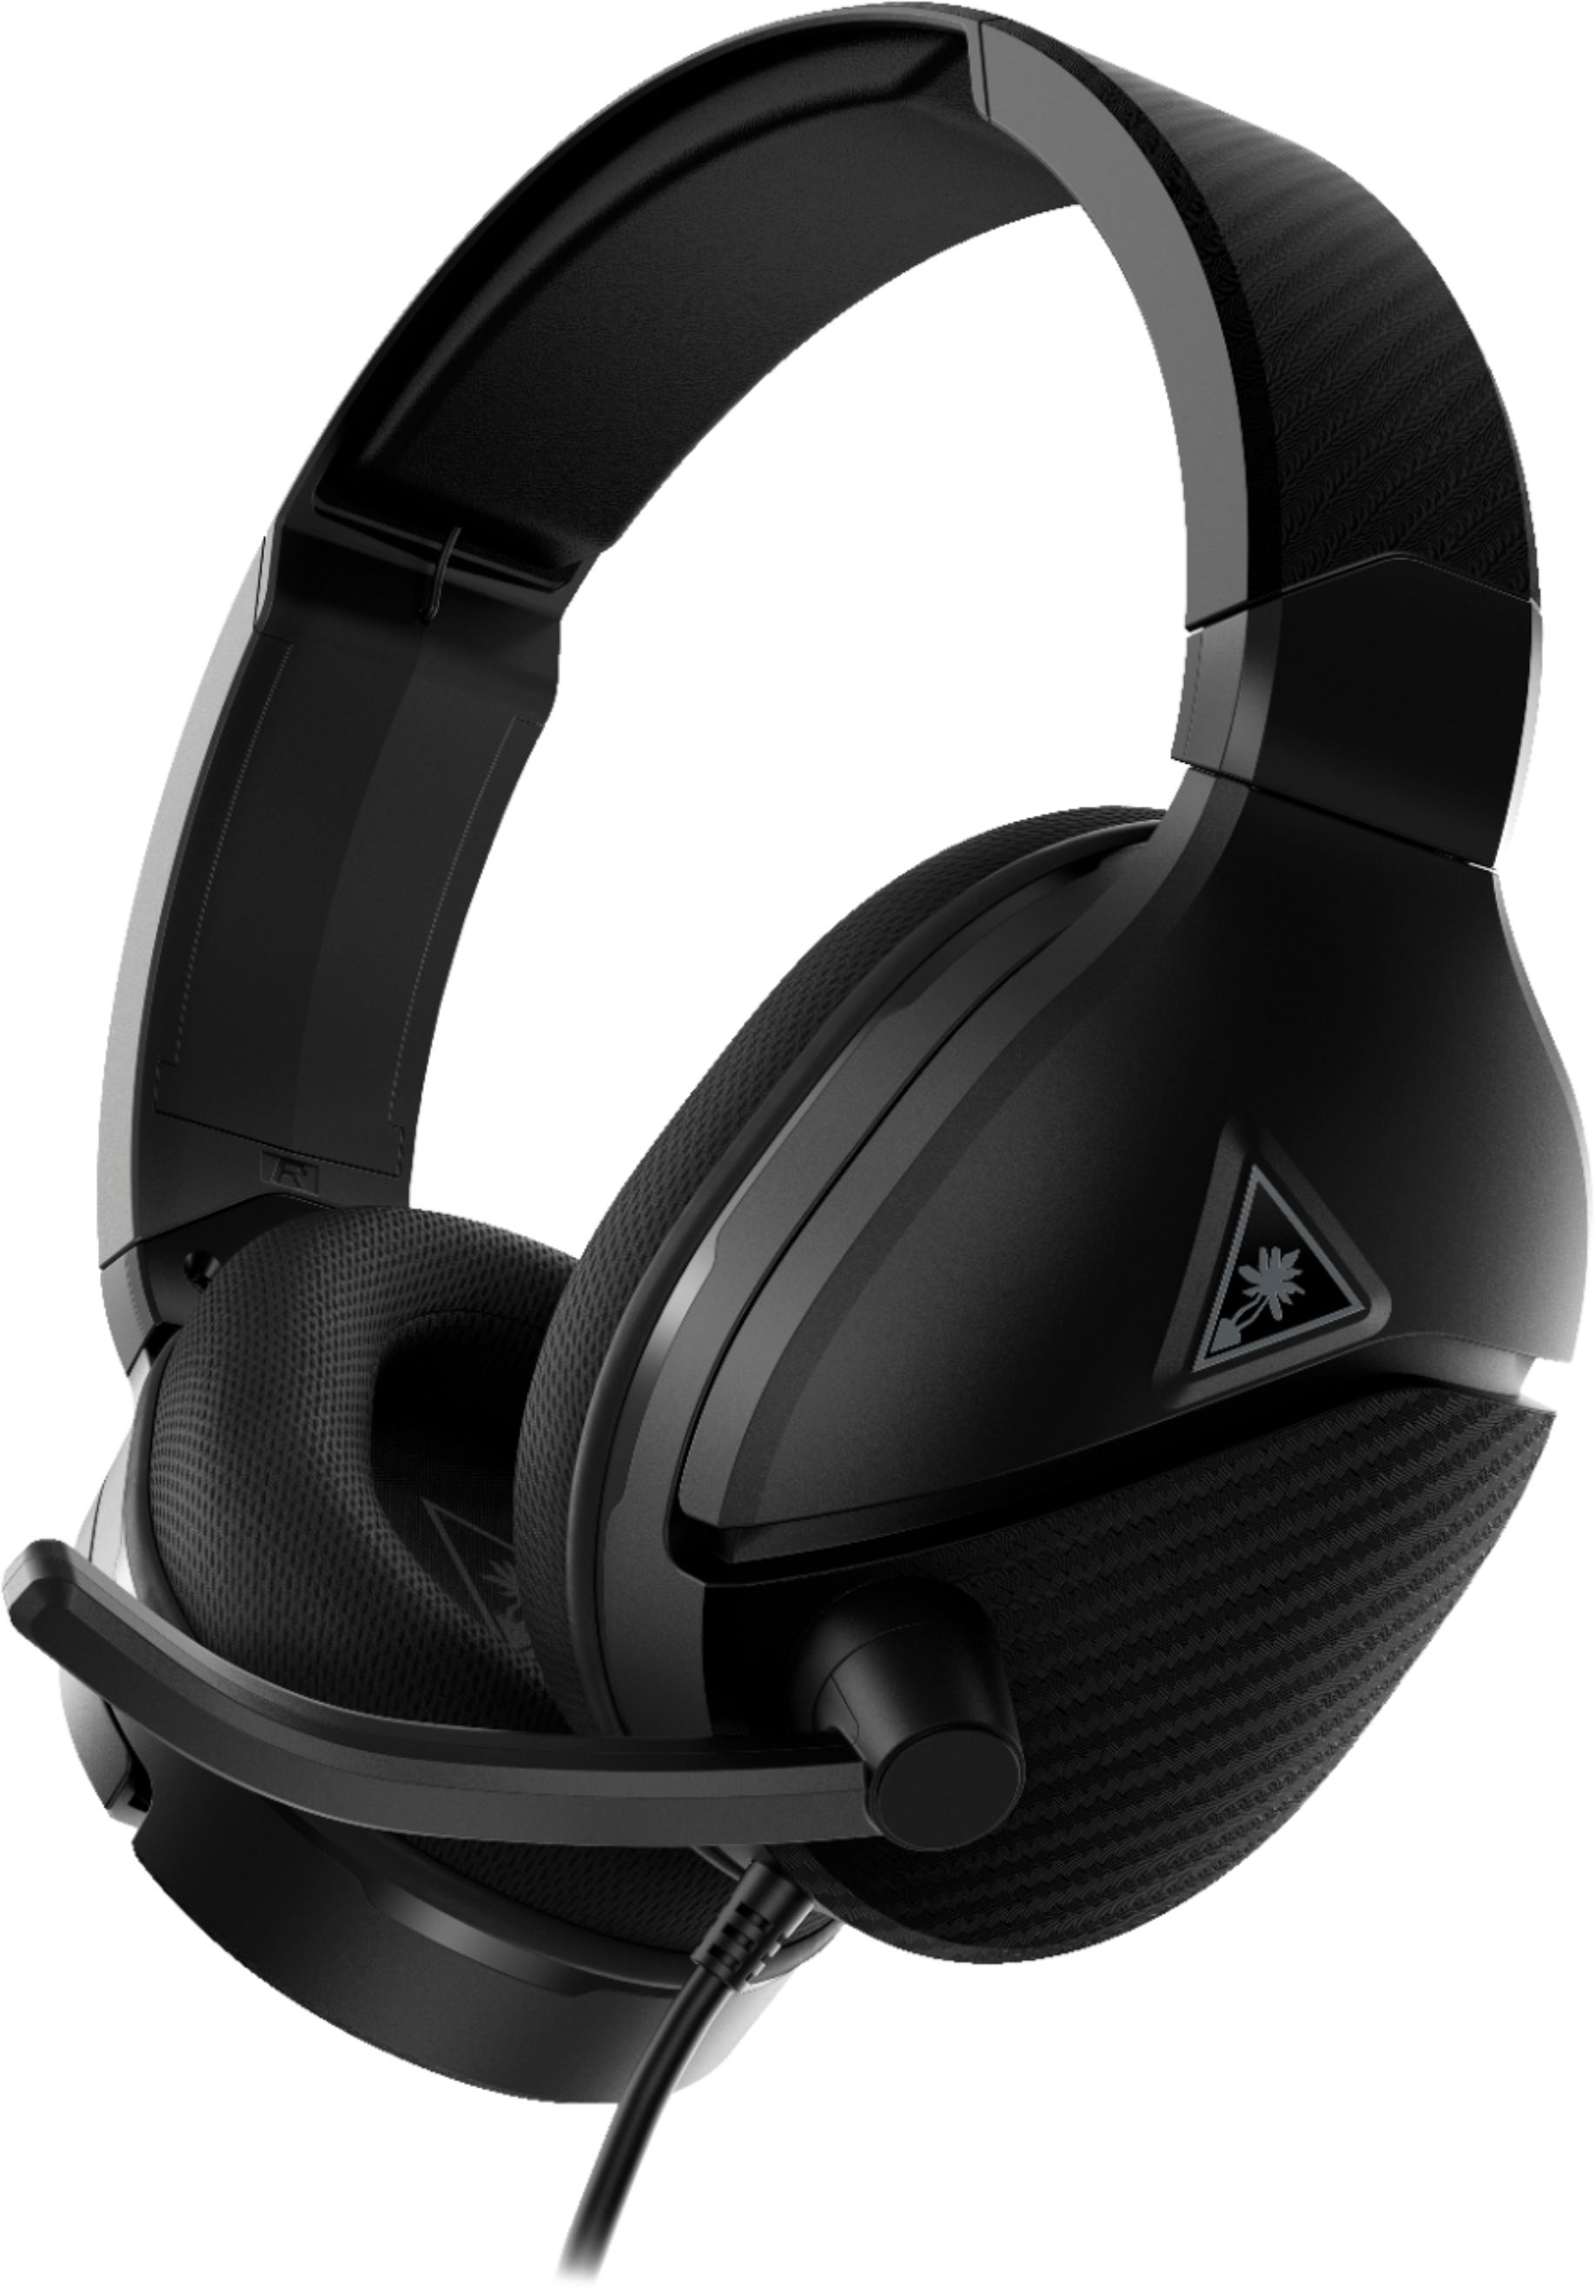 Turtle Beach Recon 200 Nintendo PS5, Headset 2 TBS-6300-01 Gen X|S, Switch Xbox for Powered - Buy Black Gaming Series PS4, One, Best Xbox